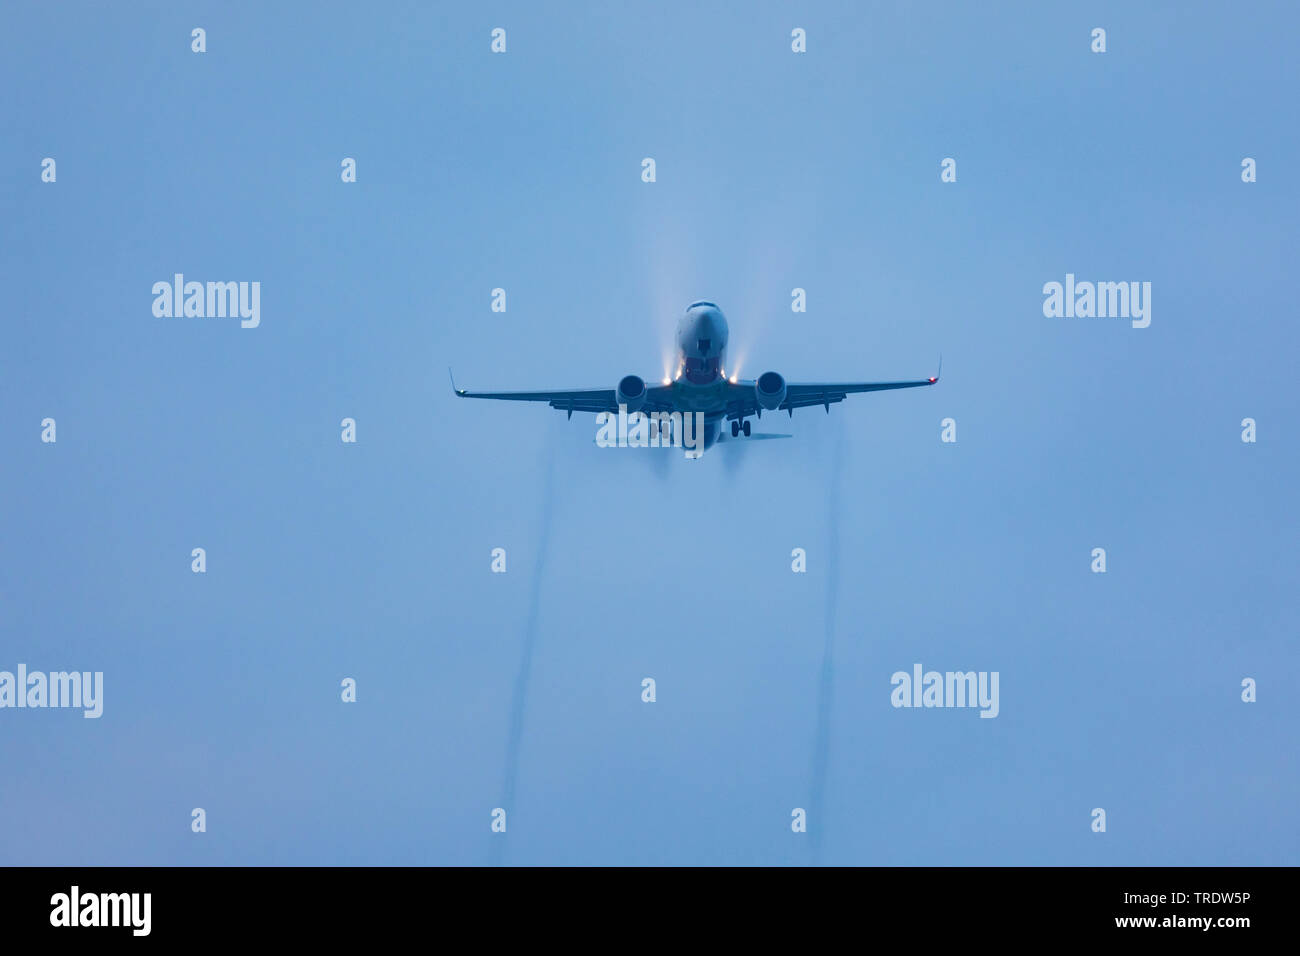 Airbus approach for landing in rain, Germany, Bavaria, Flughafen Muenchen Stock Photo